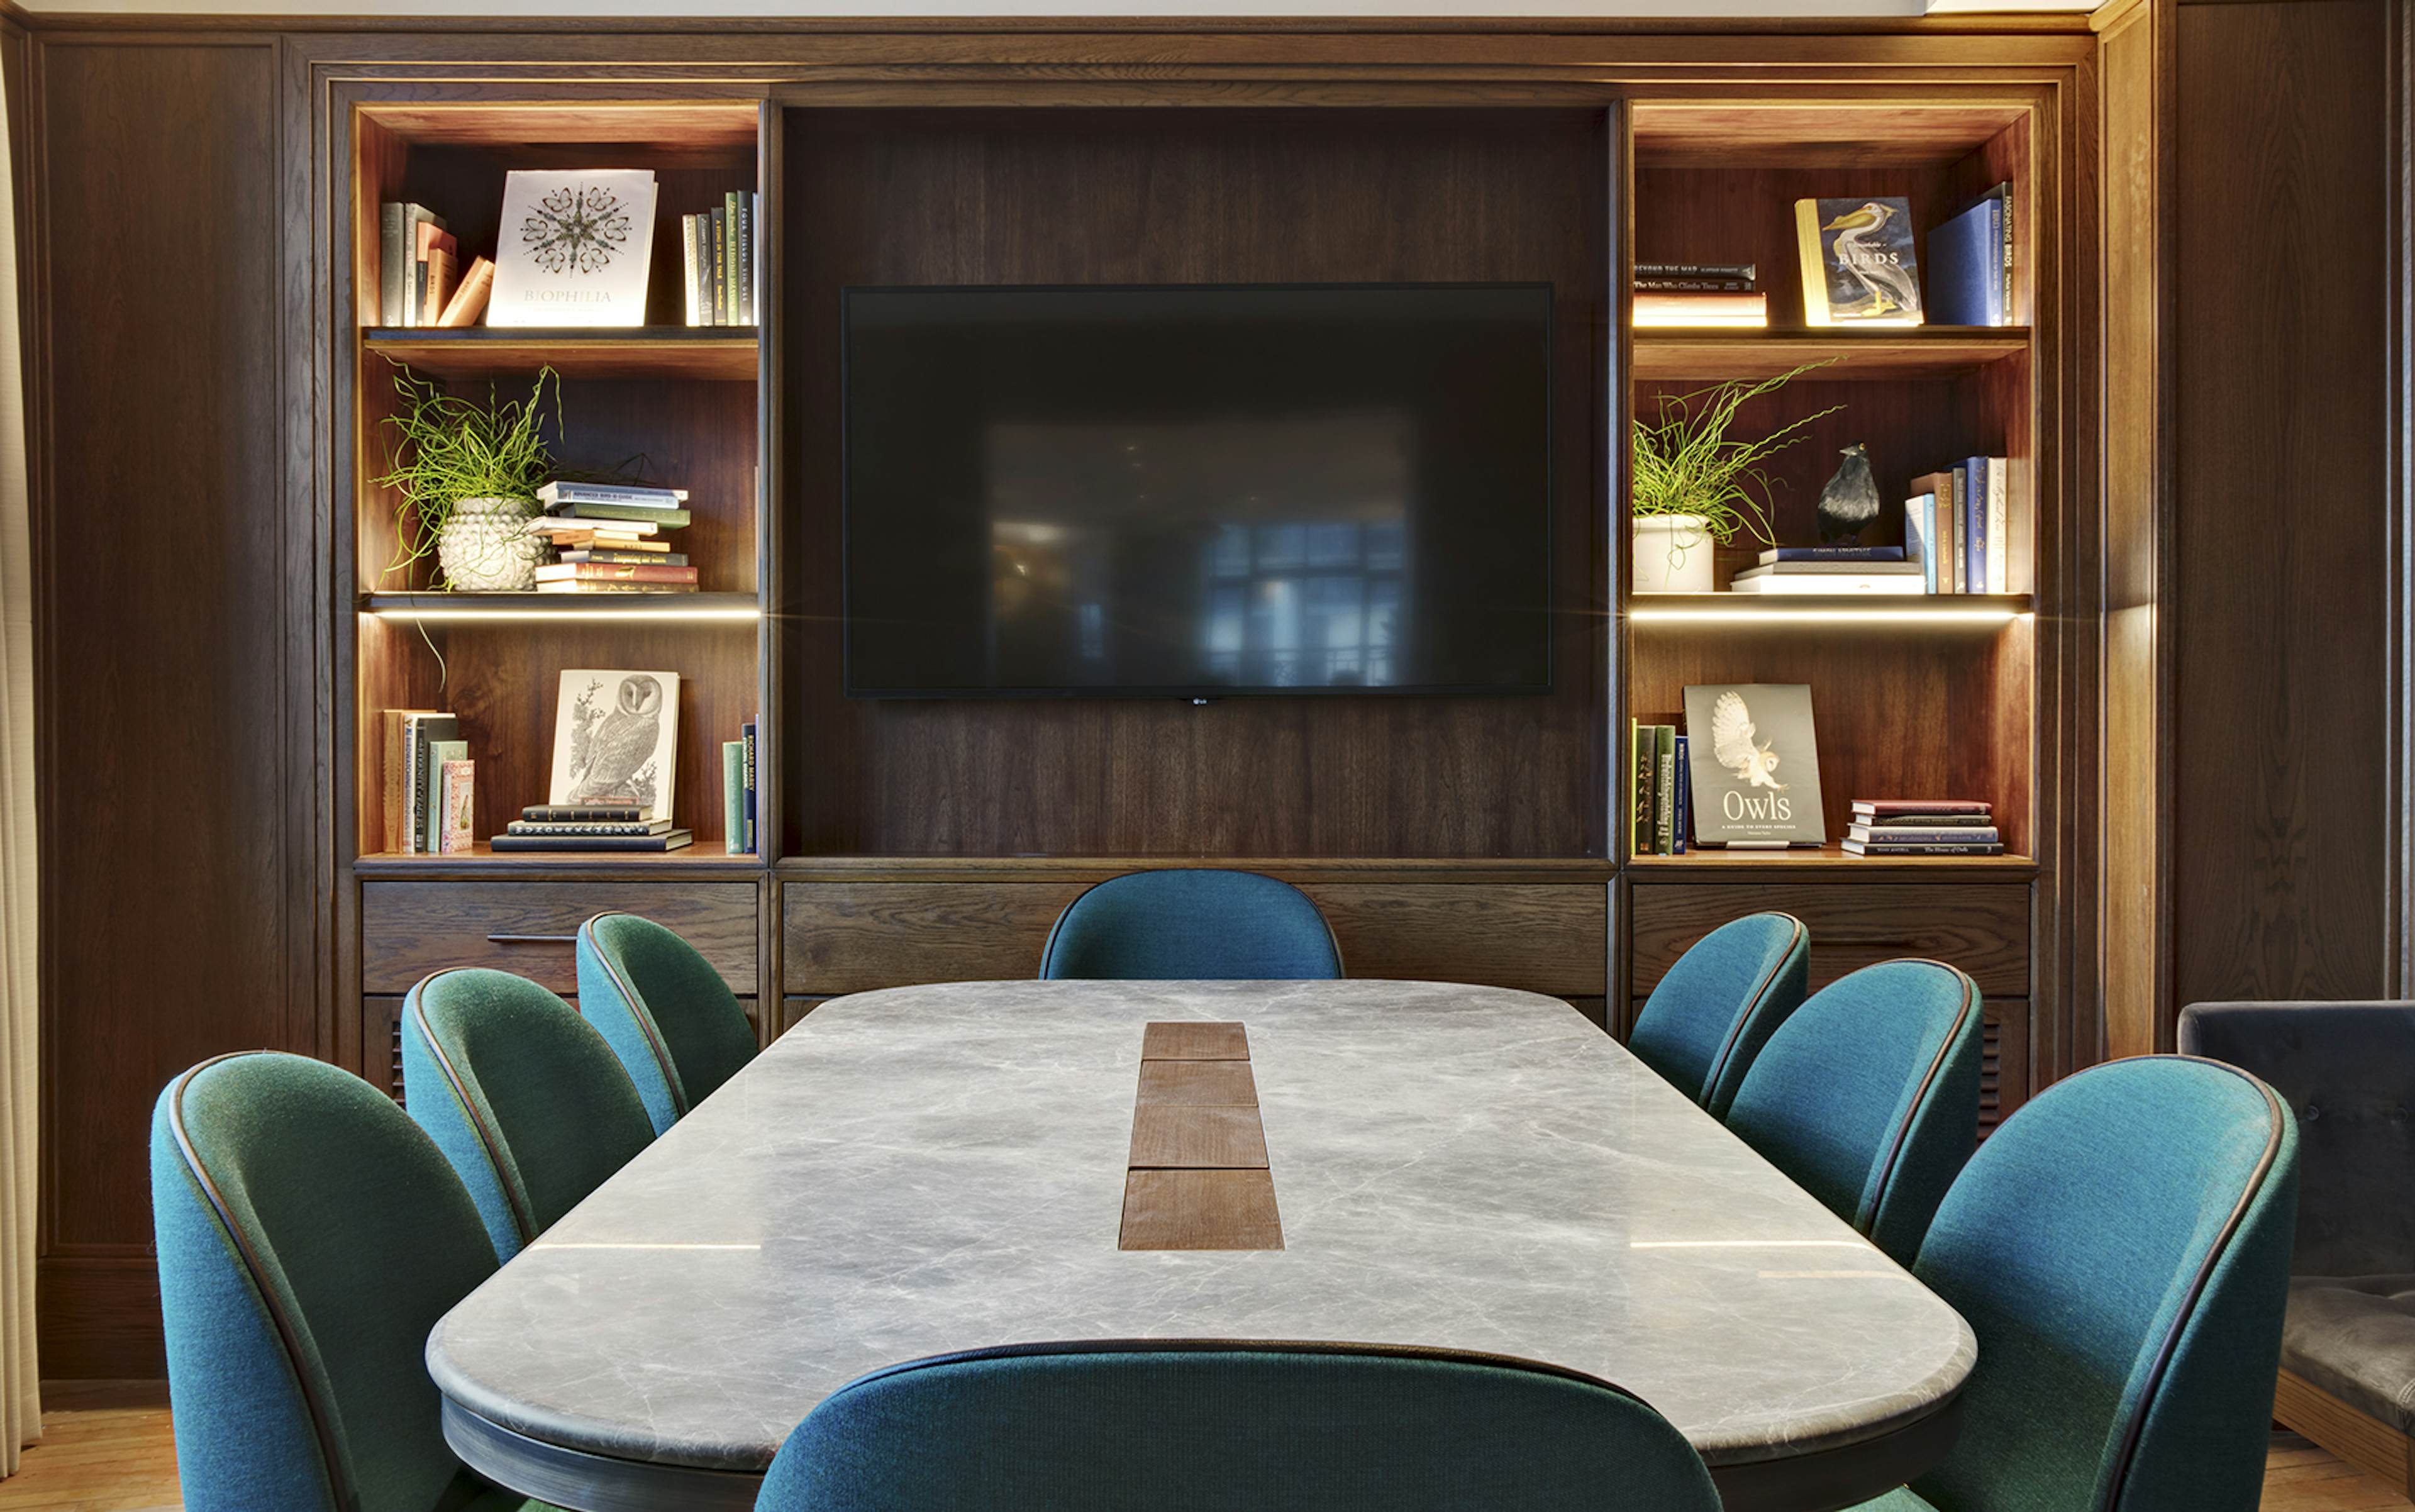 Mortimer House - Private Dining Room image 1